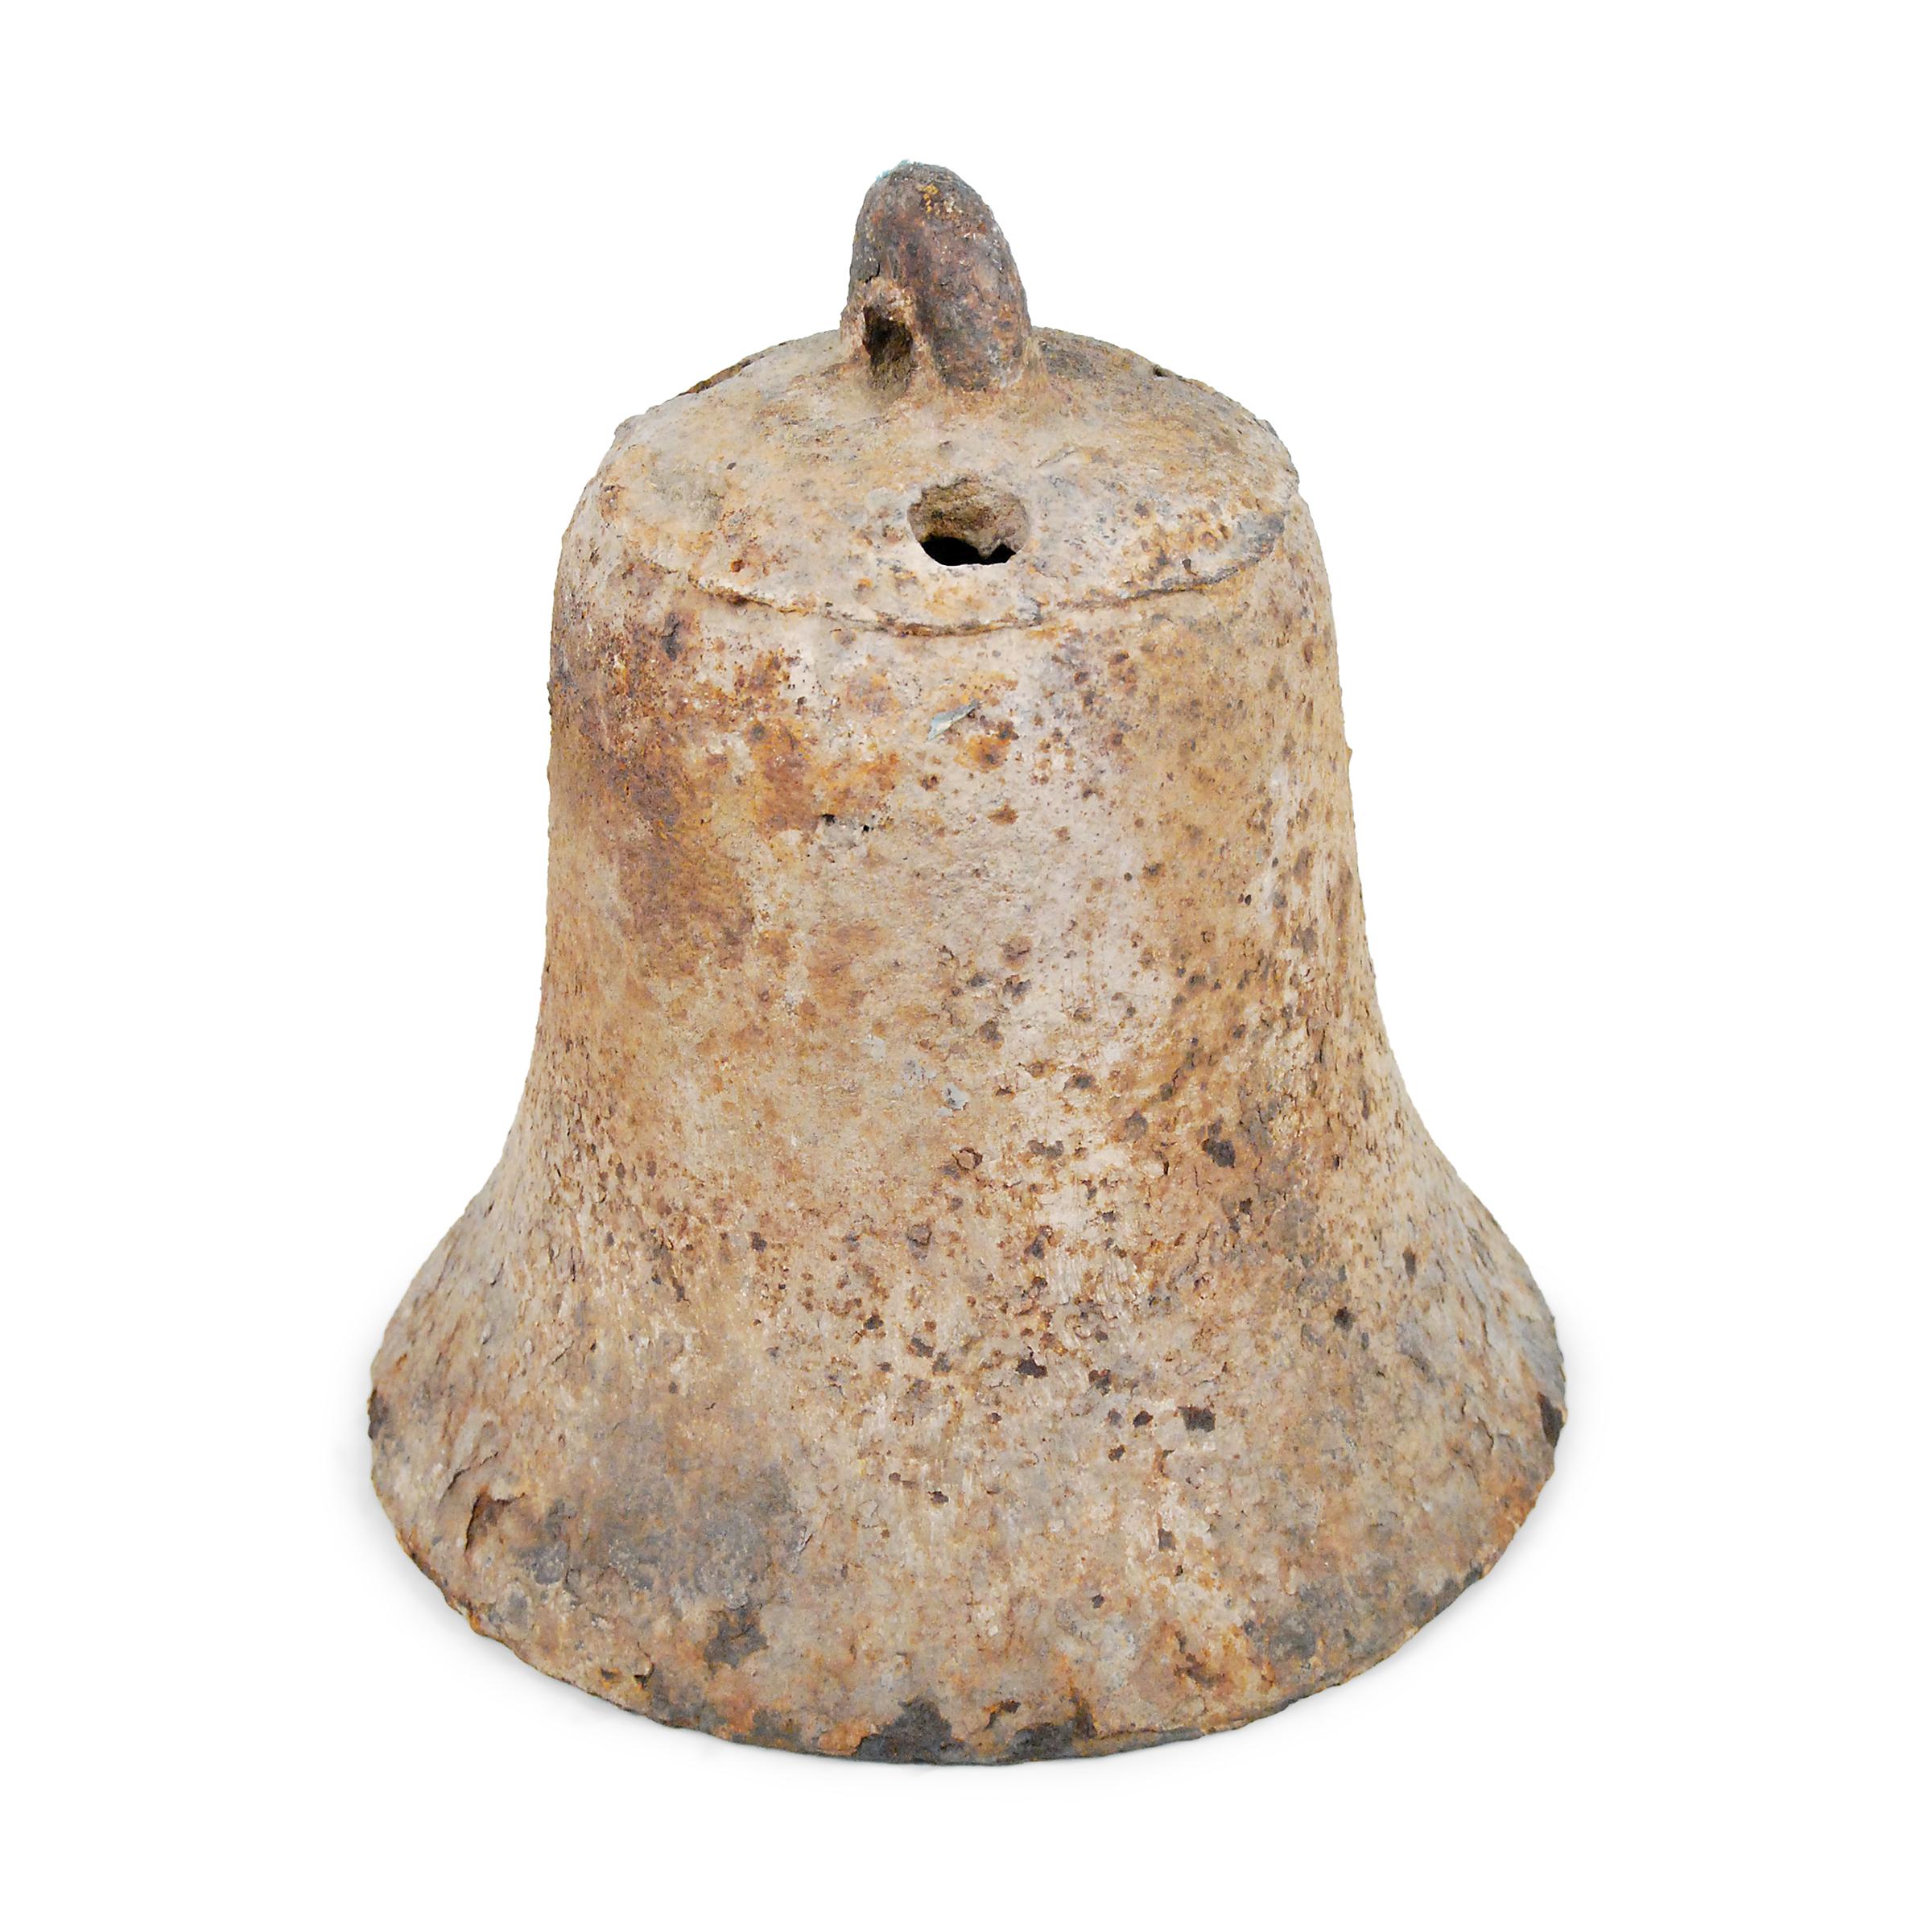 This rustic, 19th century iron bell once pealed in celebration or gave notice of important events in a town in northern China. Marked with holes to affix the clapper or insert a pole, the bell has a well-worn, rusted surface texture that looks